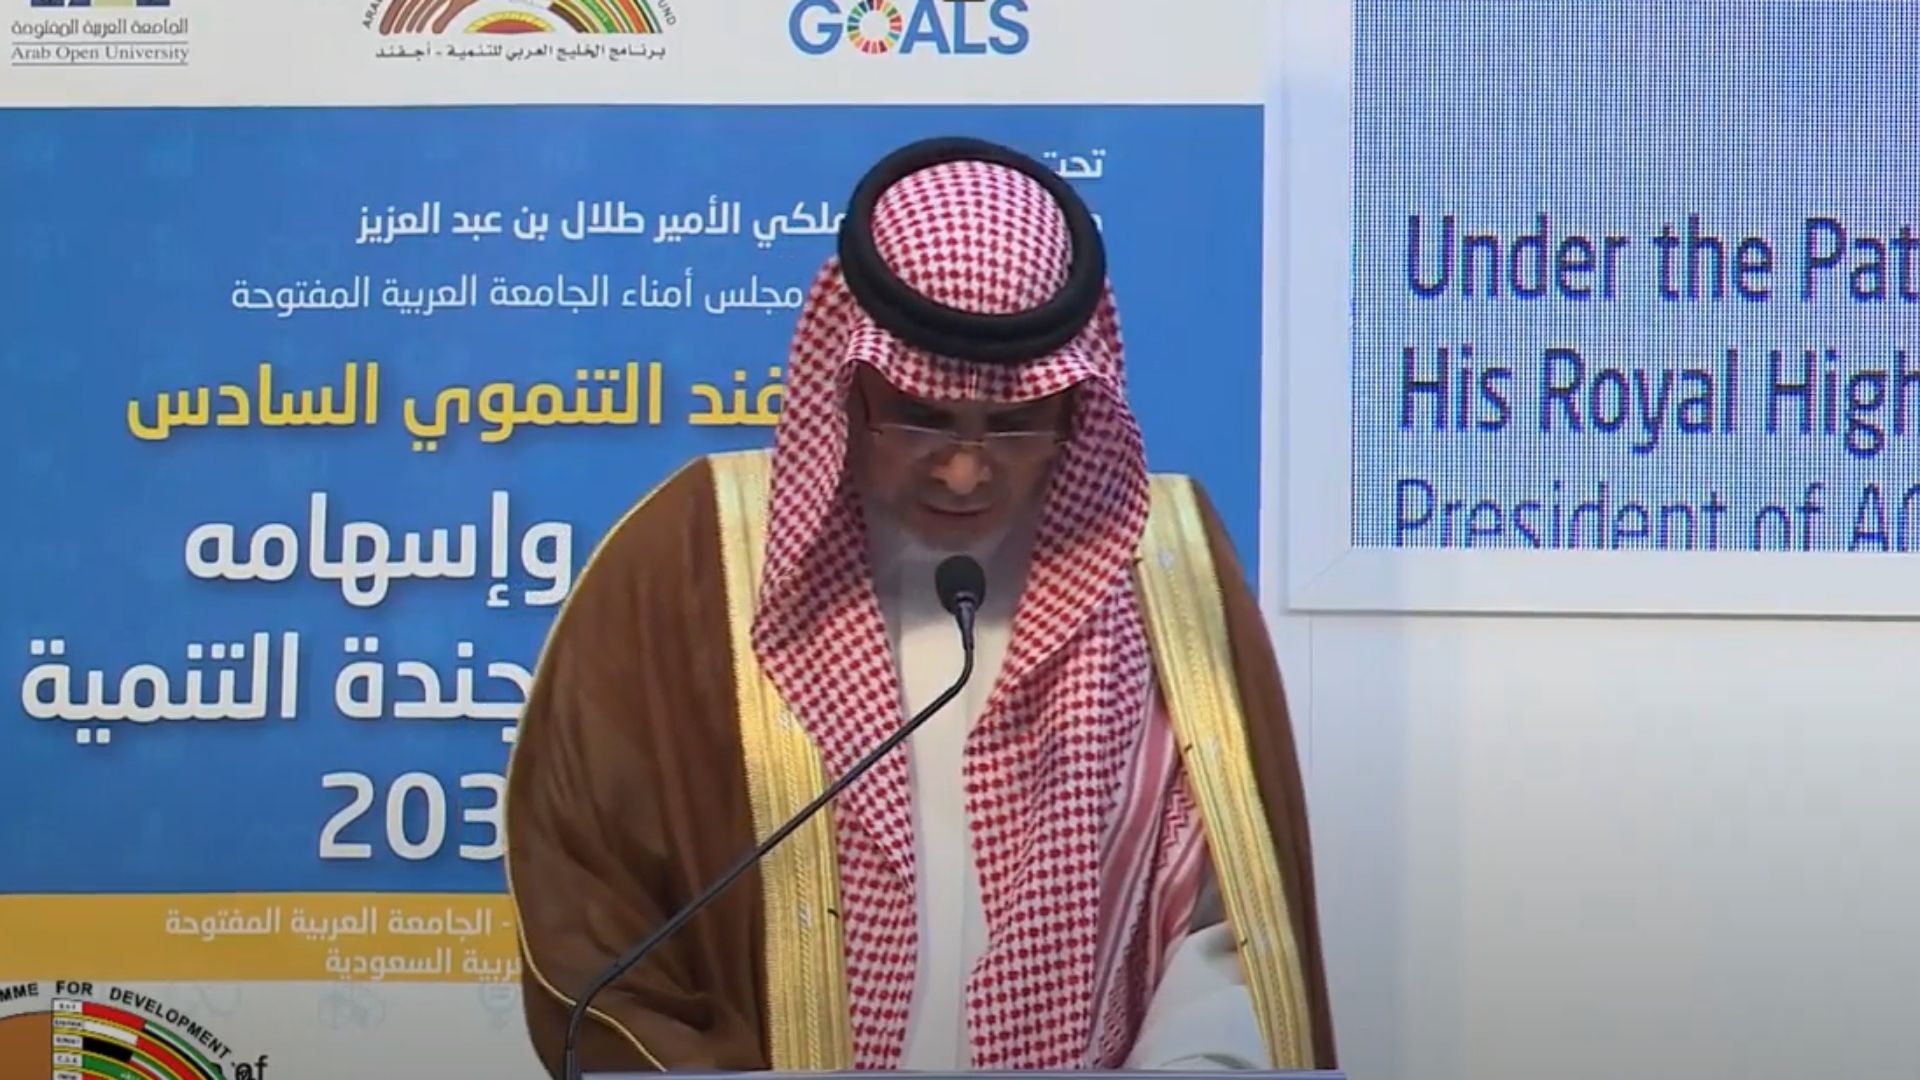 Speech of His Excellency the Saudi Minister of Education, Dr. Ahmed Al-Issa at the opening of the 6th AGFUND Development Forum